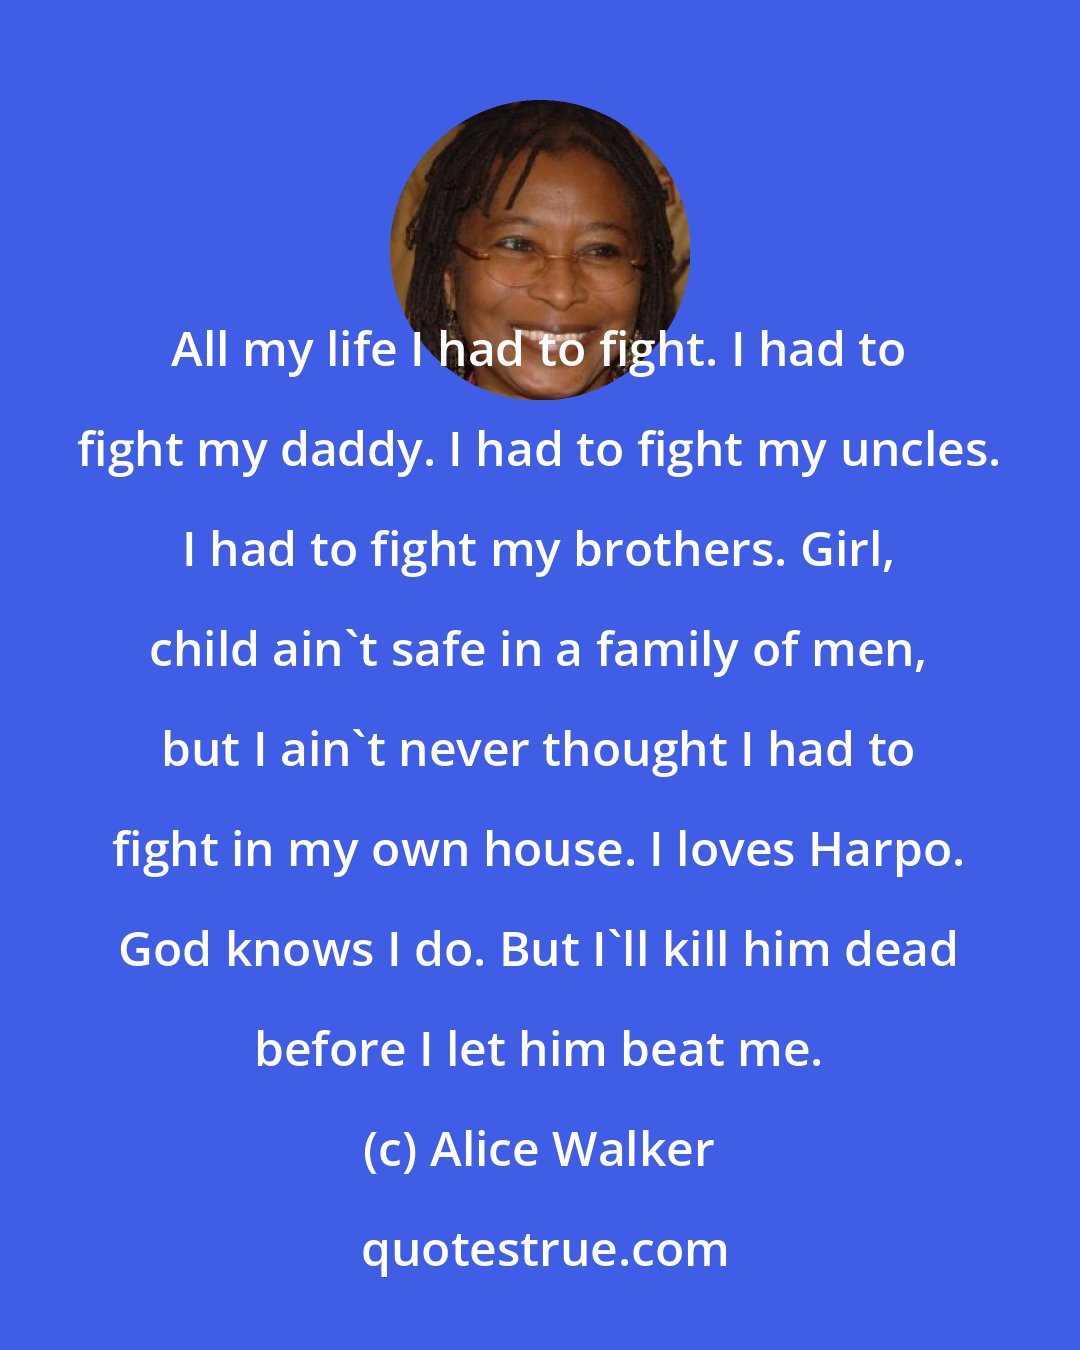 Alice Walker: All my life I had to fight. I had to fight my daddy. I had to fight my uncles. I had to fight my brothers. Girl, child ain't safe in a family of men, but I ain't never thought I had to fight in my own house. I loves Harpo. God knows I do. But I'll kill him dead before I let him beat me.